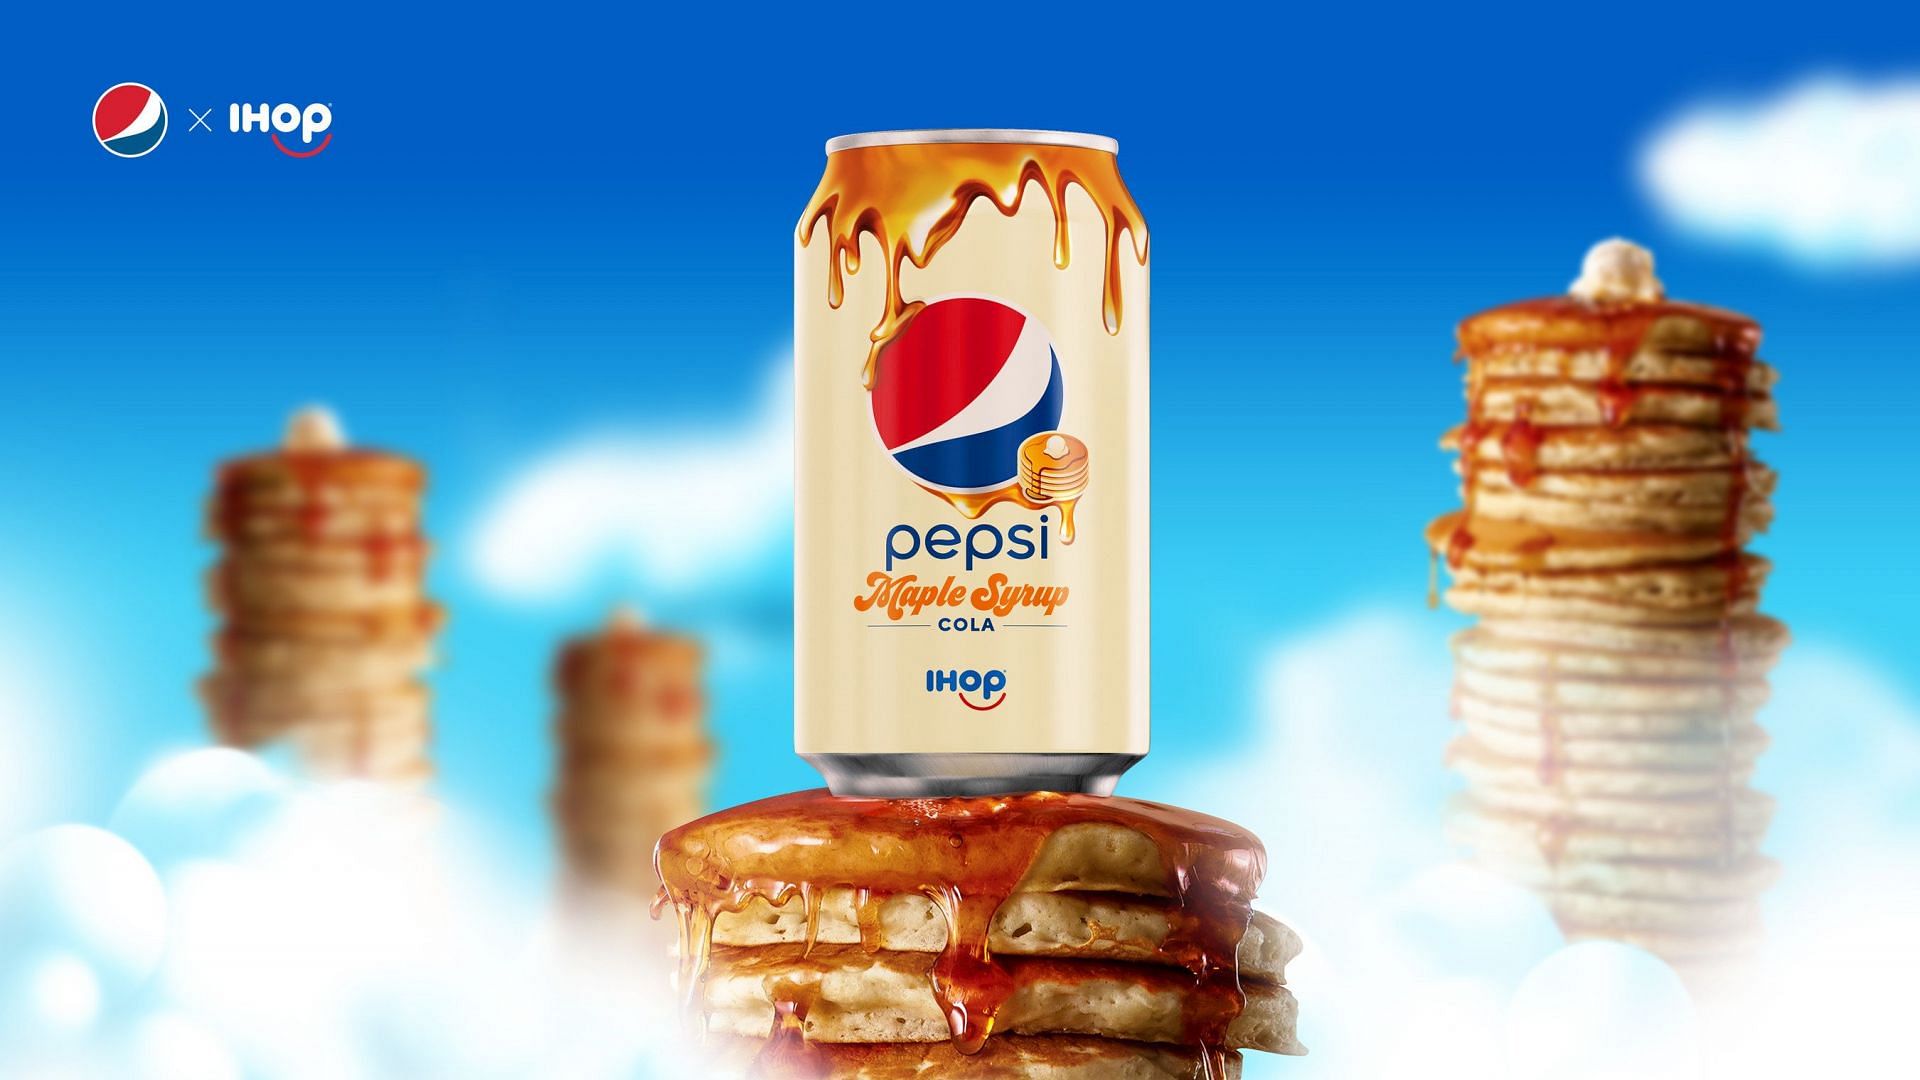 The Pepsi Maple Syrup x IHOP collab was recently announced (Image via PepsiCo)